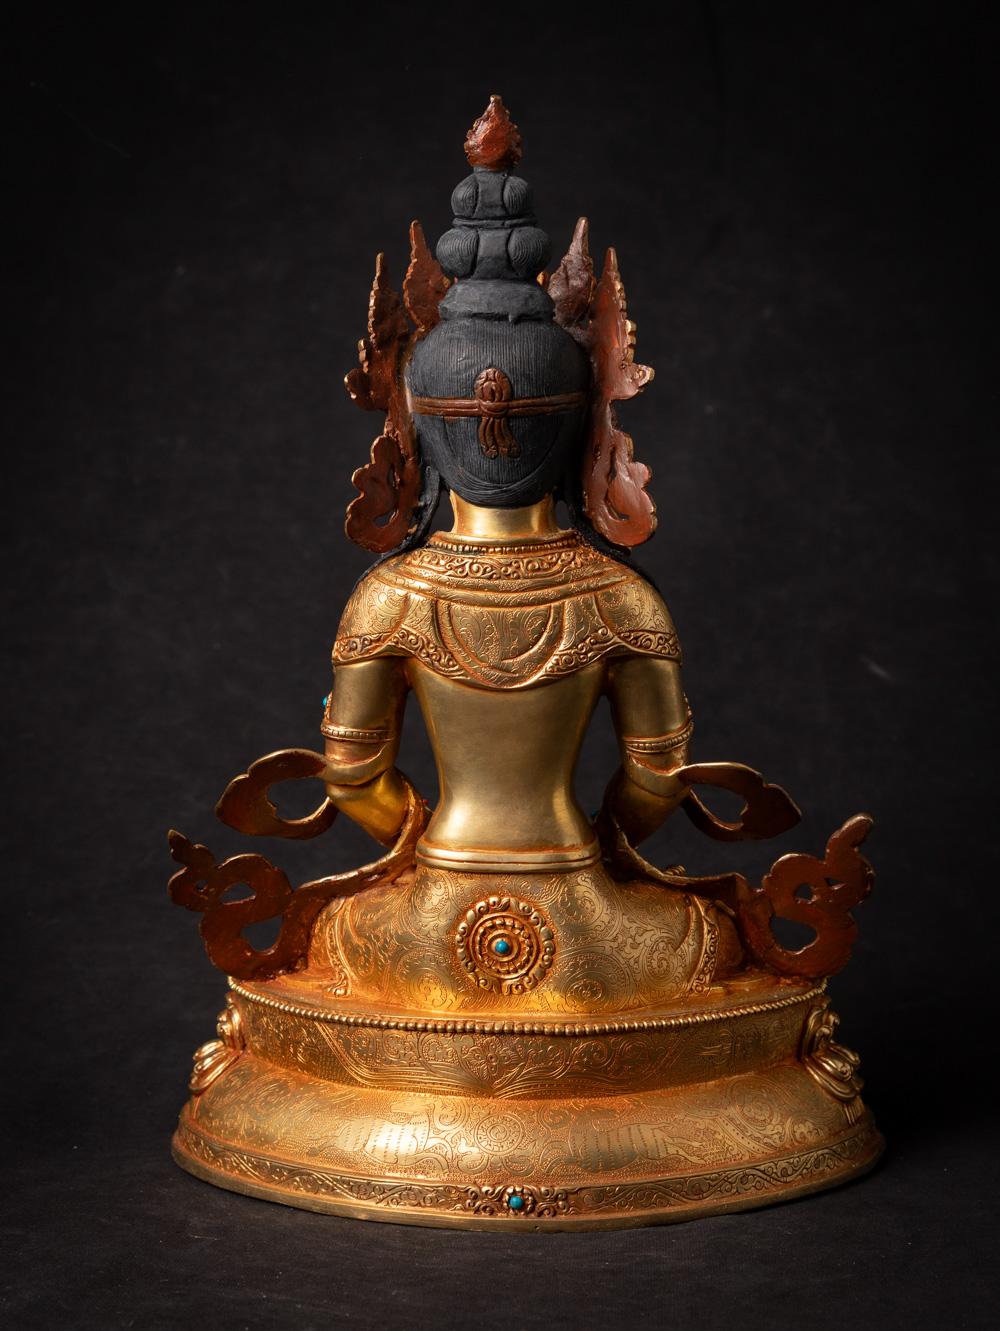 Material : bronze
32,6 cm high
23,6 cm wide and 16,2 cm deep
Fire gilded with 24 krt. gold - the face is gold painted
Dhyana mudra
Newly made in the highest quality !
Weight: 3,6 kgs
Originating from Nepal
Nr: 3713-8